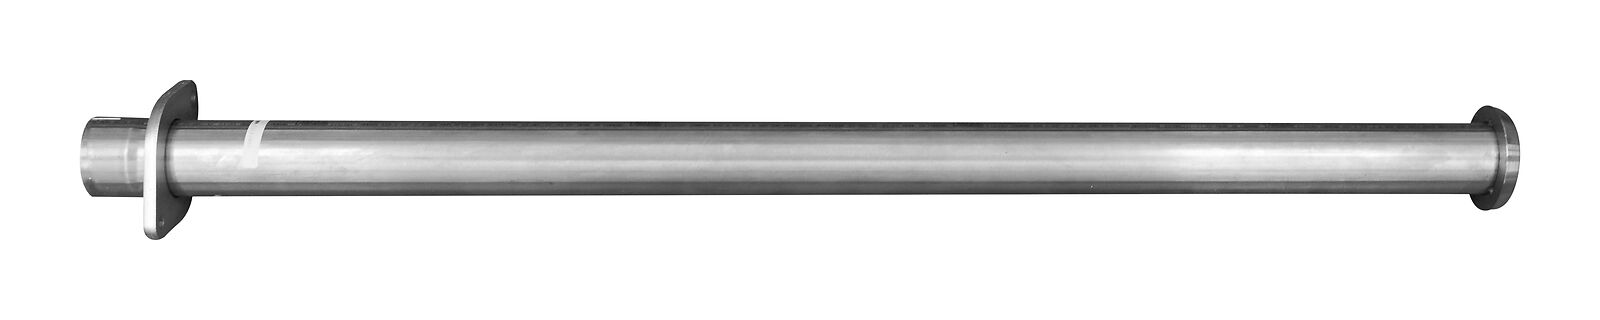 Corsa Performance Resonator Delete Exhaust Pipe Fits 2011-14 Ford F-150 14754